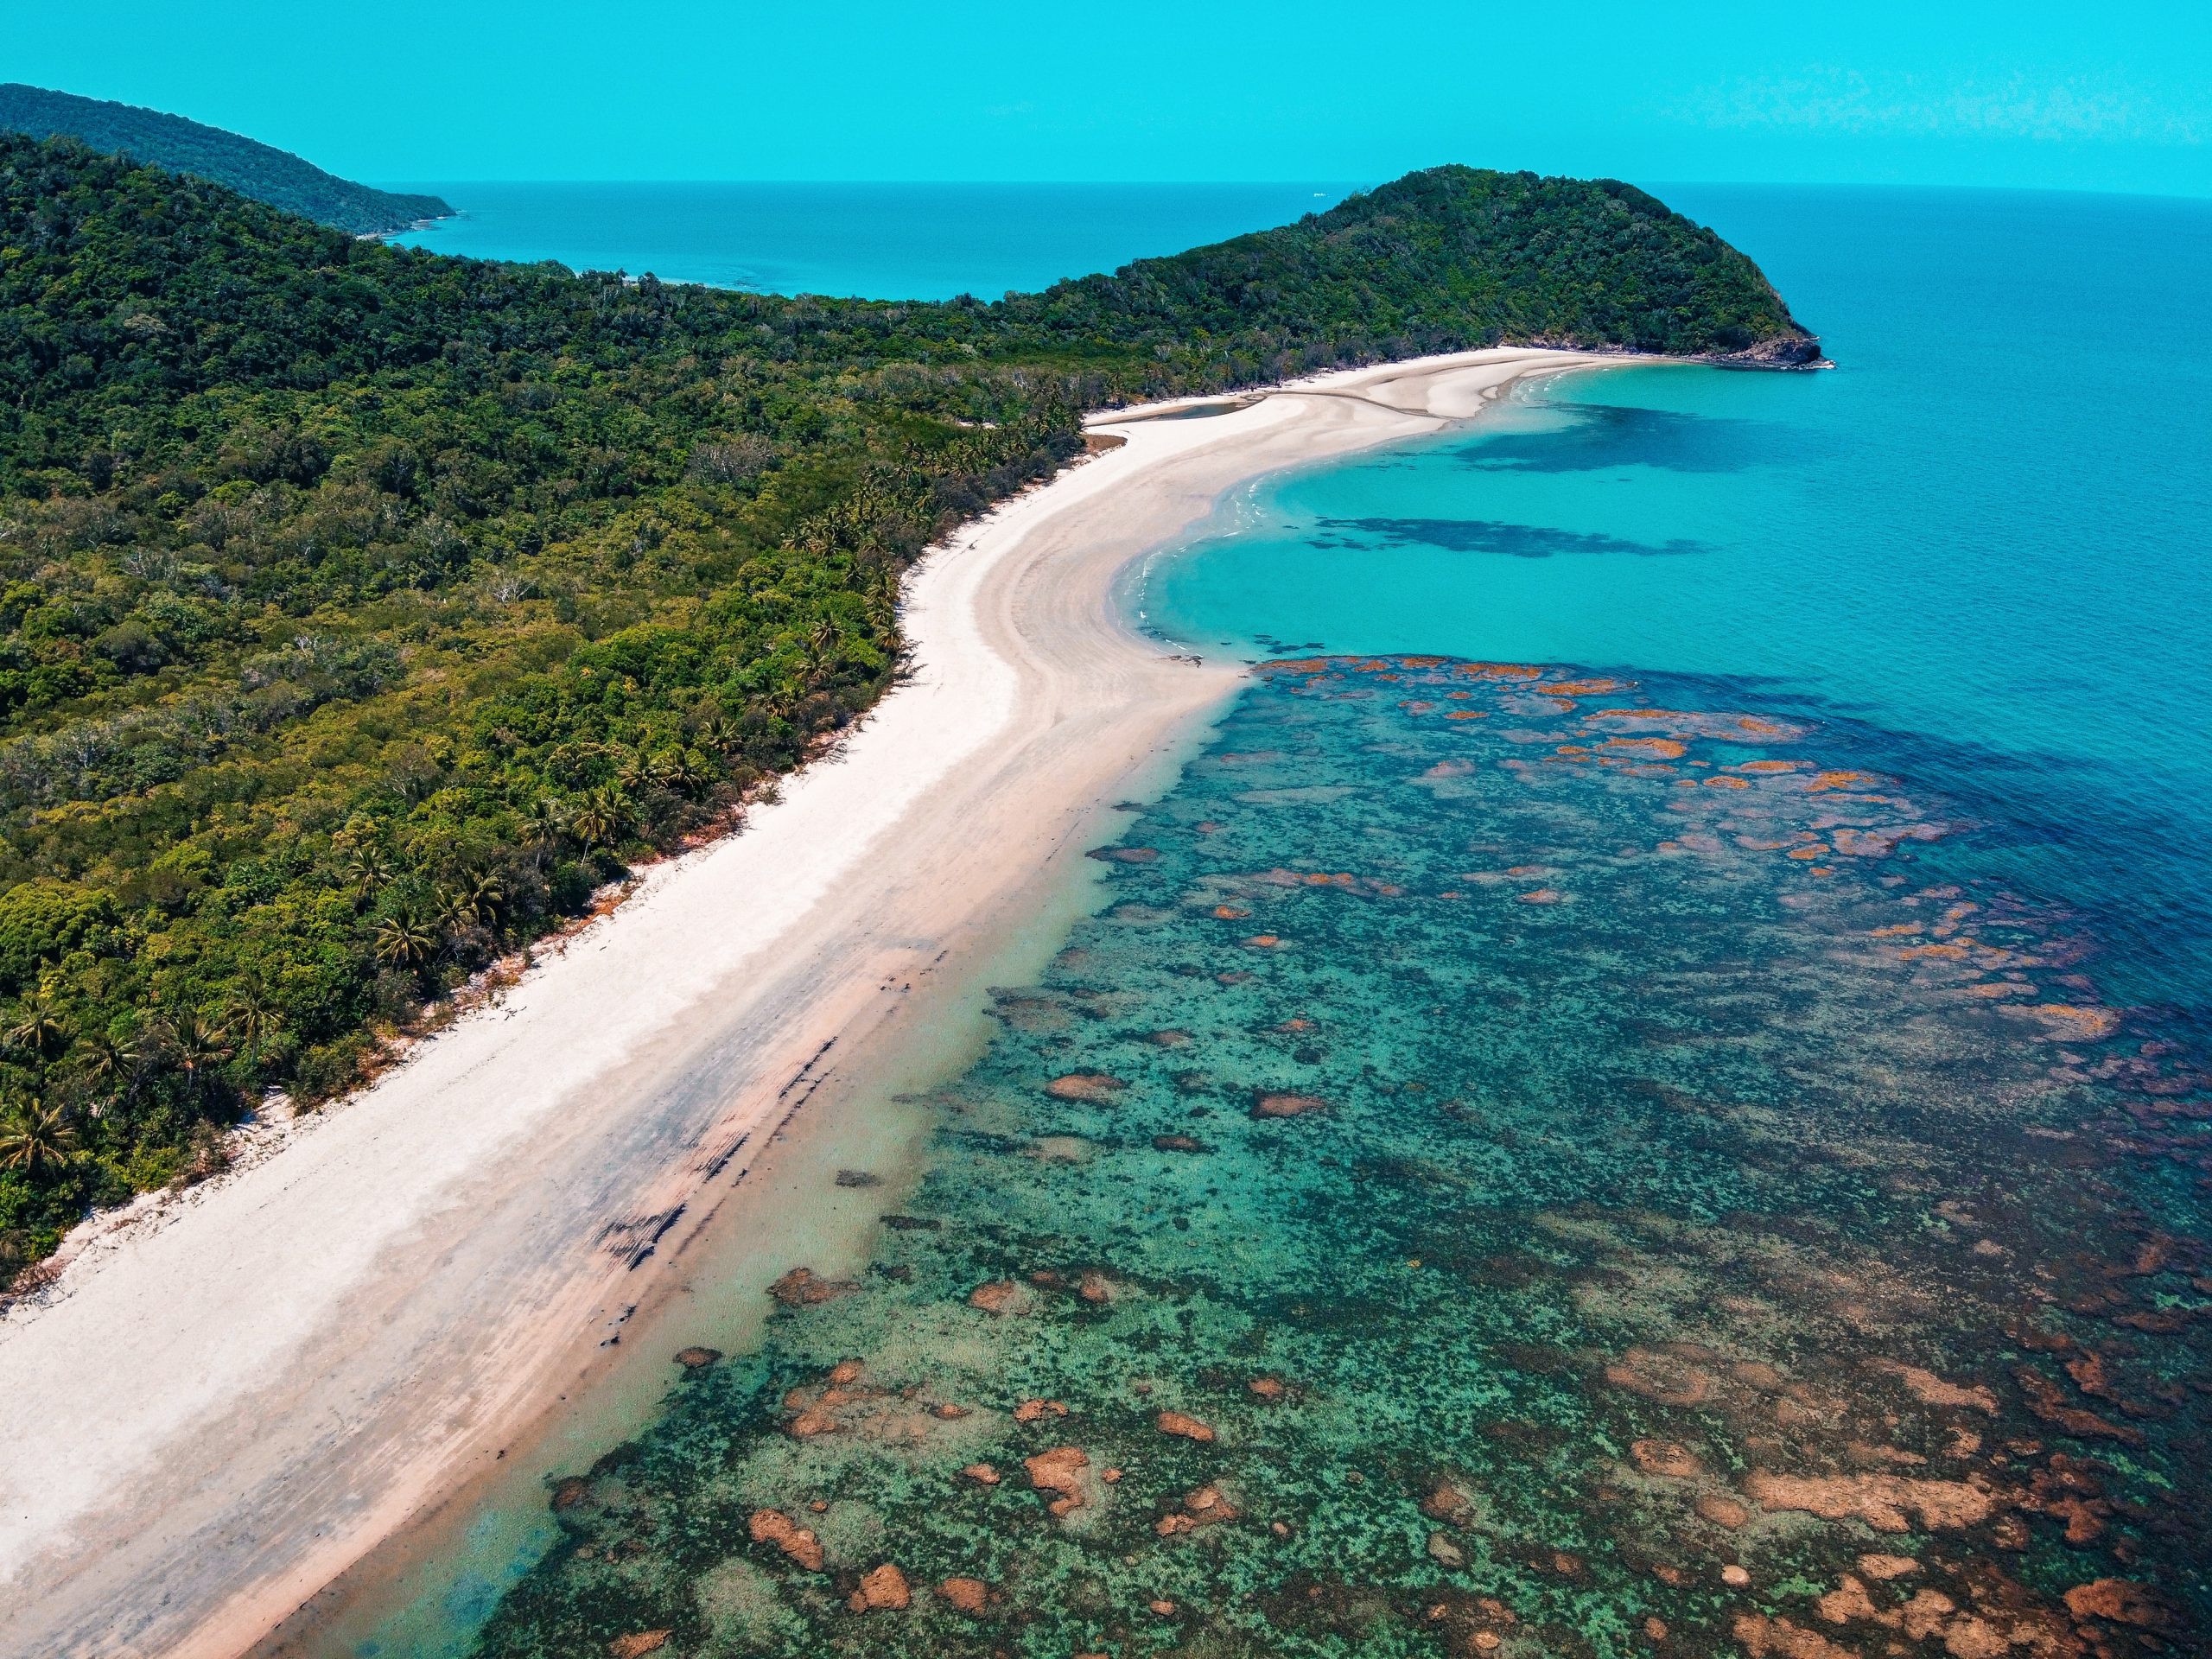 The Great Barrier Reef from above - Daintree Rainforest, Australia - 30 Trips to Take in Your 30s